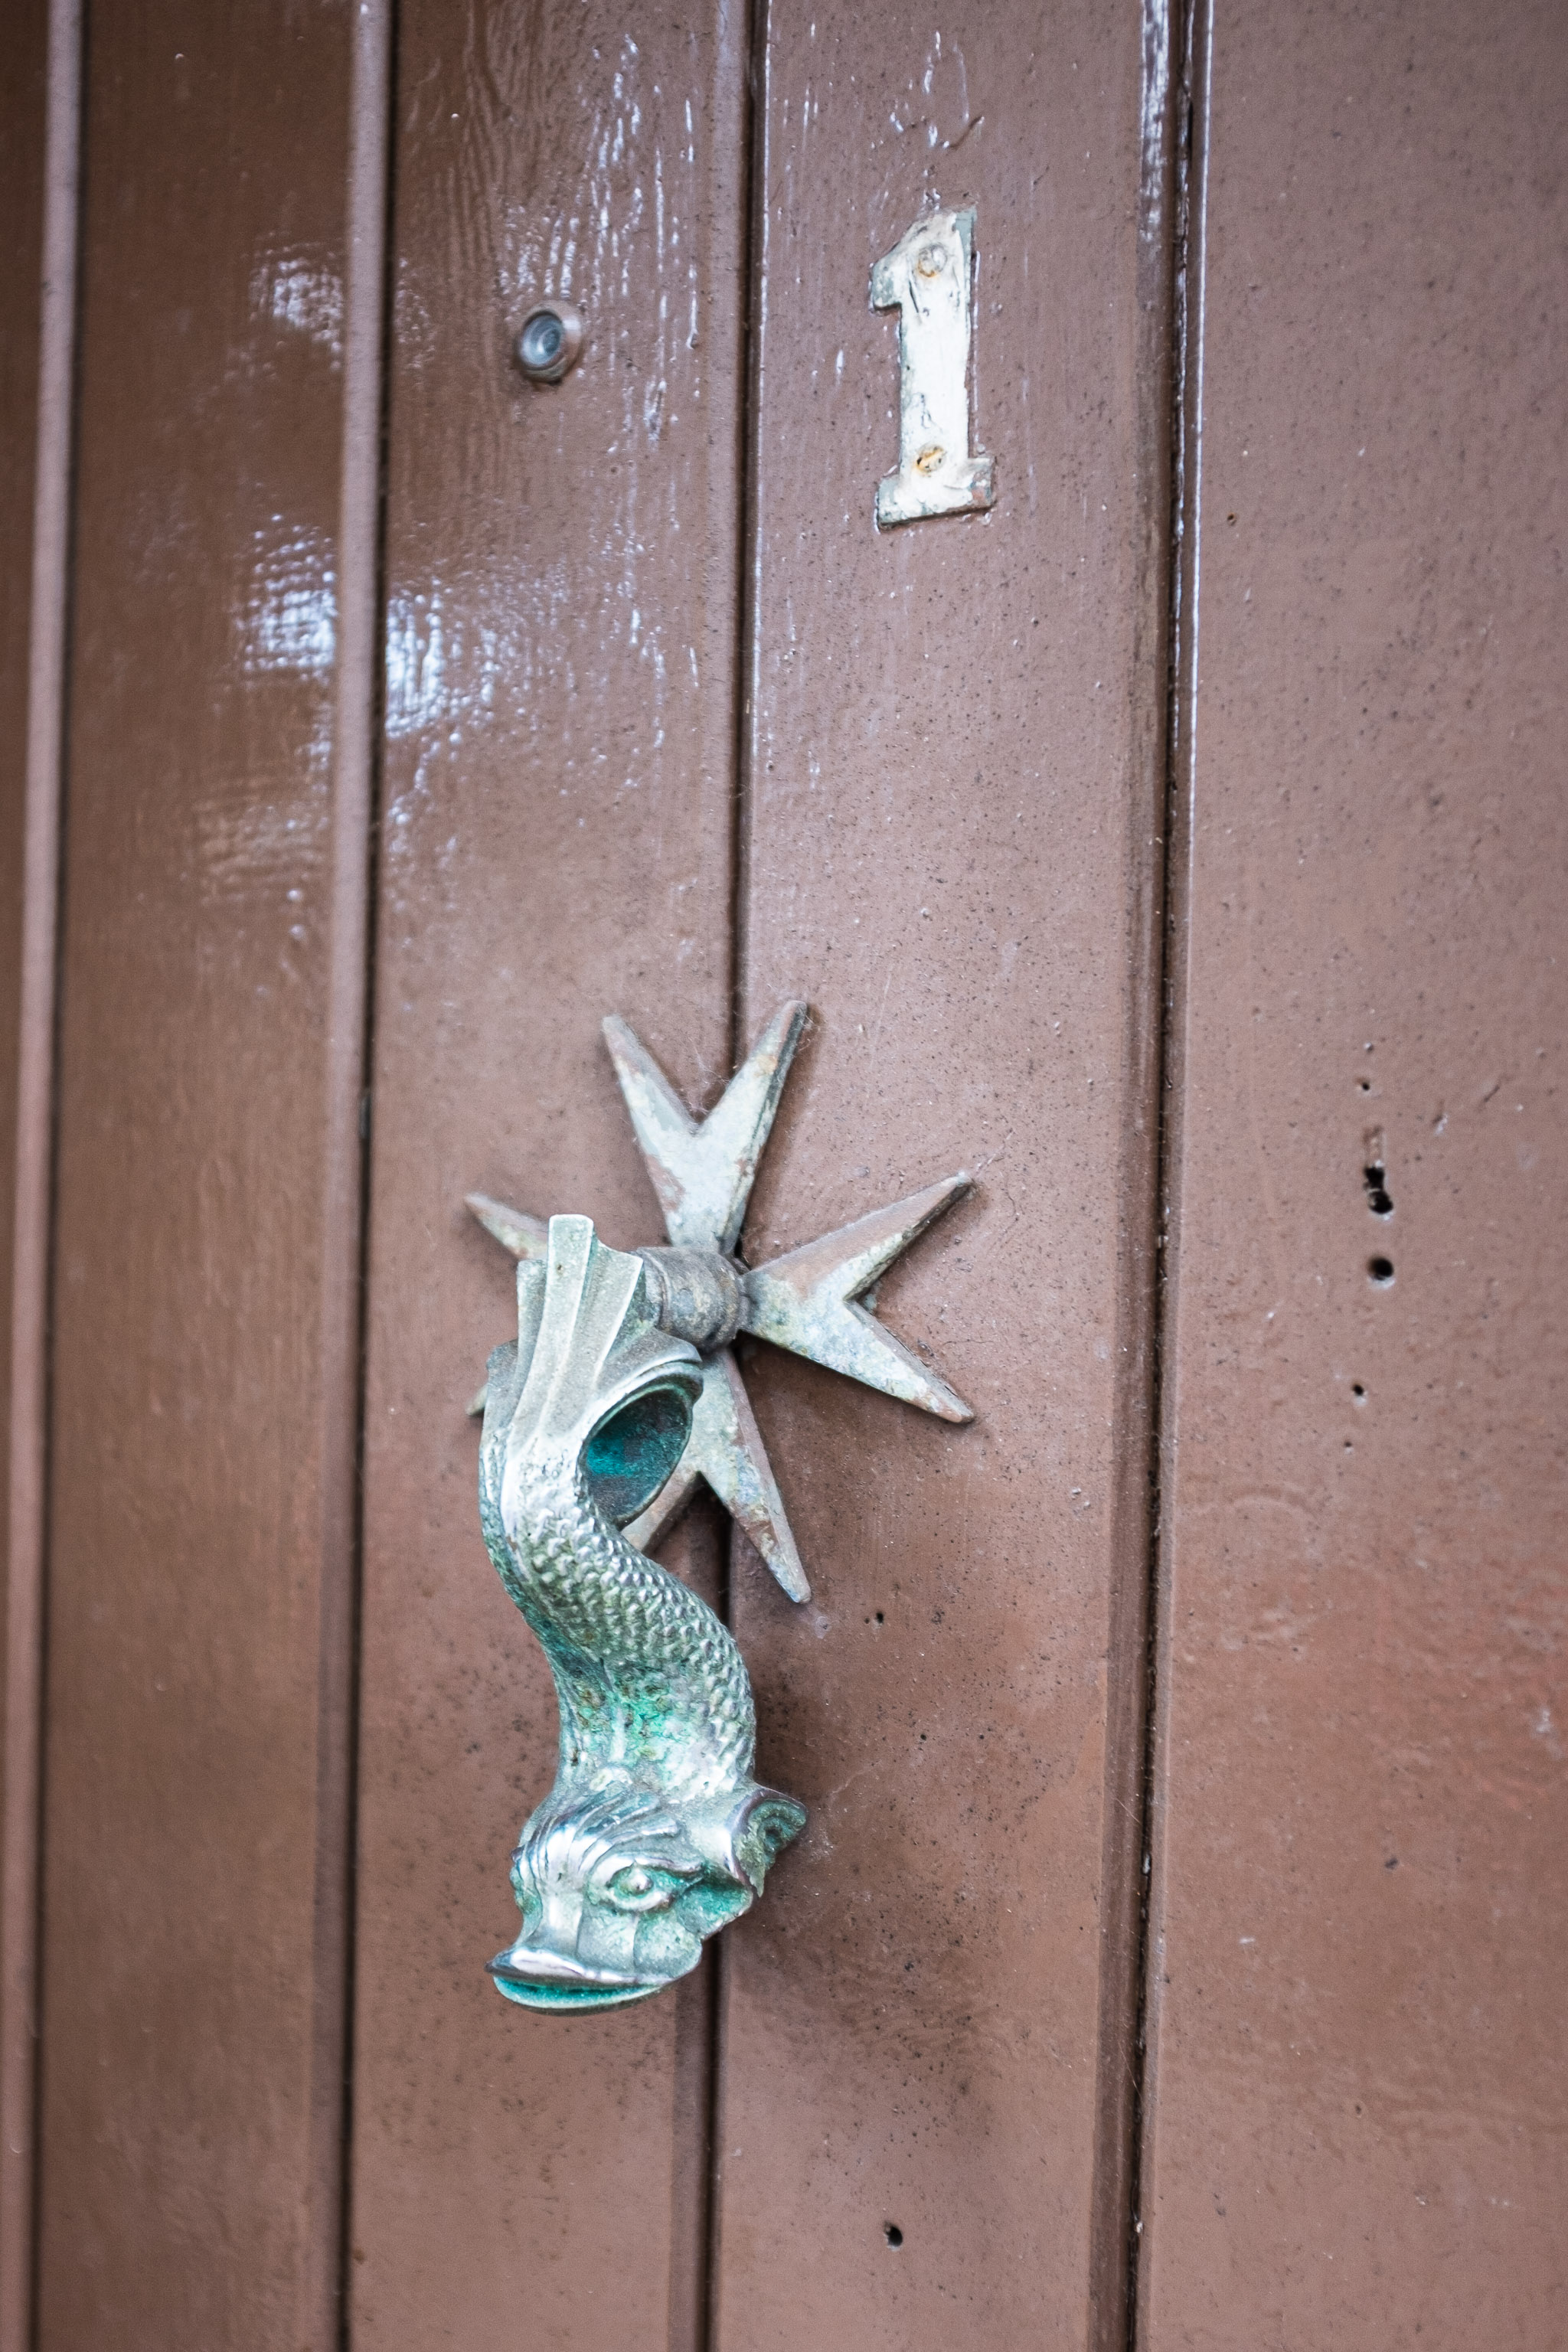 Fishy
Maybe I'm starting a knocker fixation after last weekend's walk. Interesting that it's mounted on a Maltese cross. I wonder if it was a holiday sou...